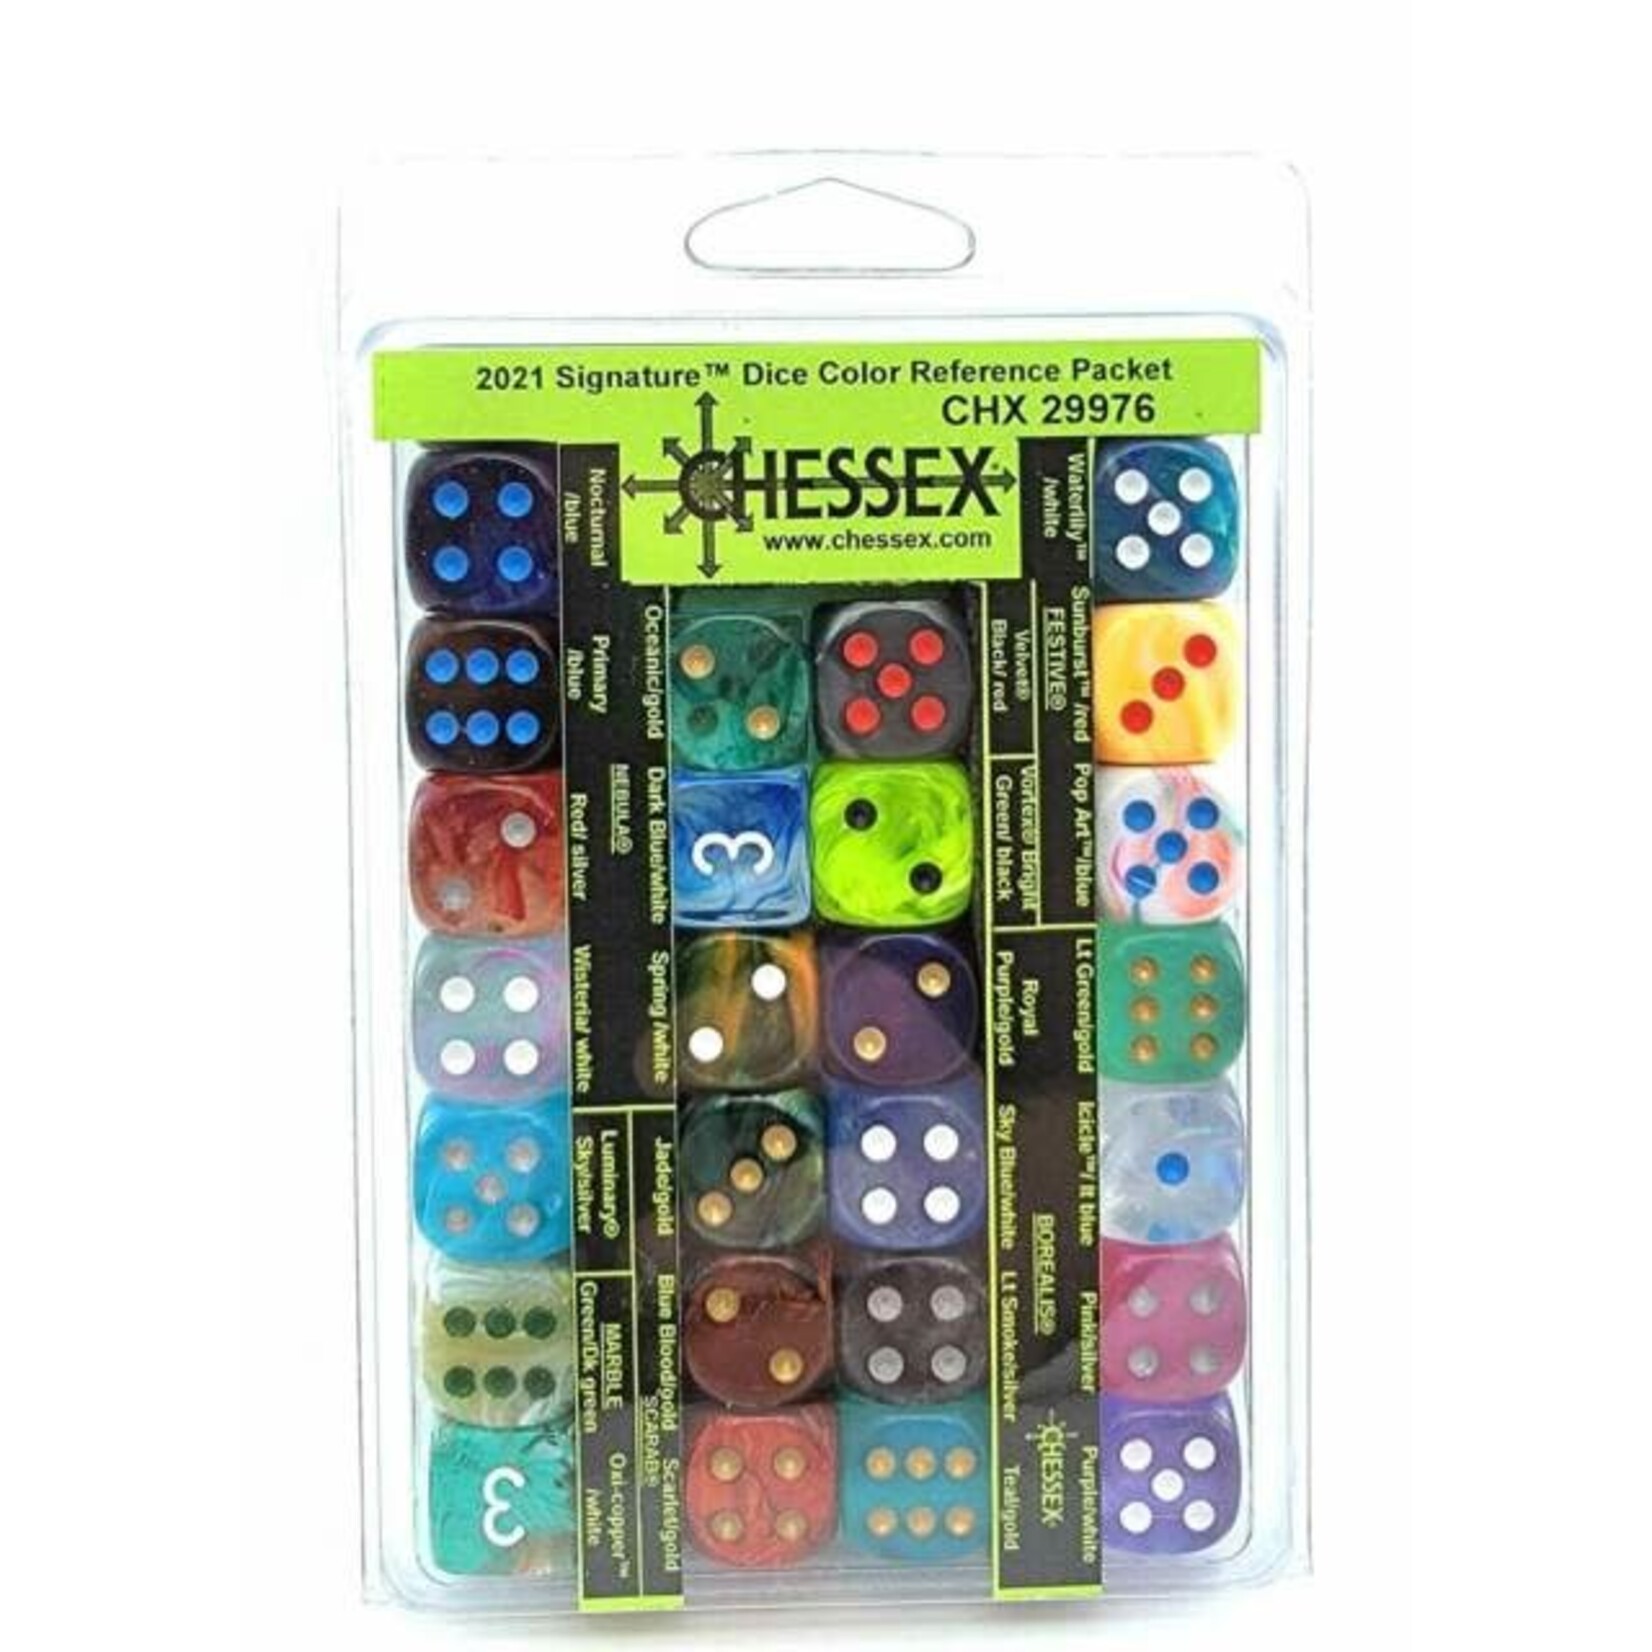 Chessex 2023 Signature™ Dice Color Reference Packet